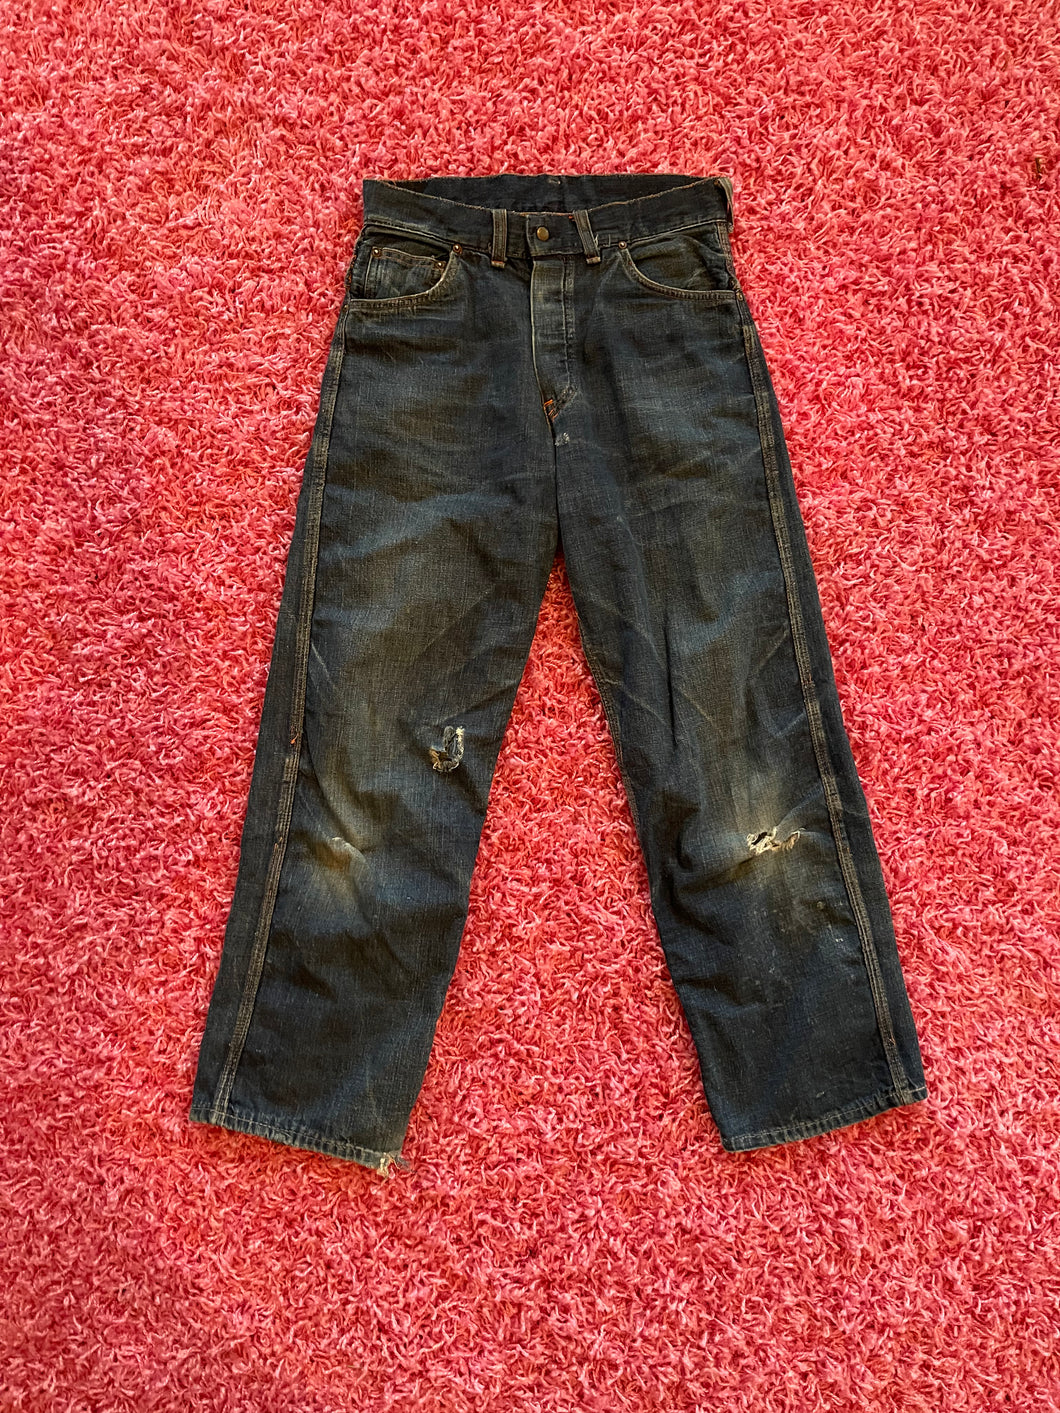 RARE 40s buckle back jeans